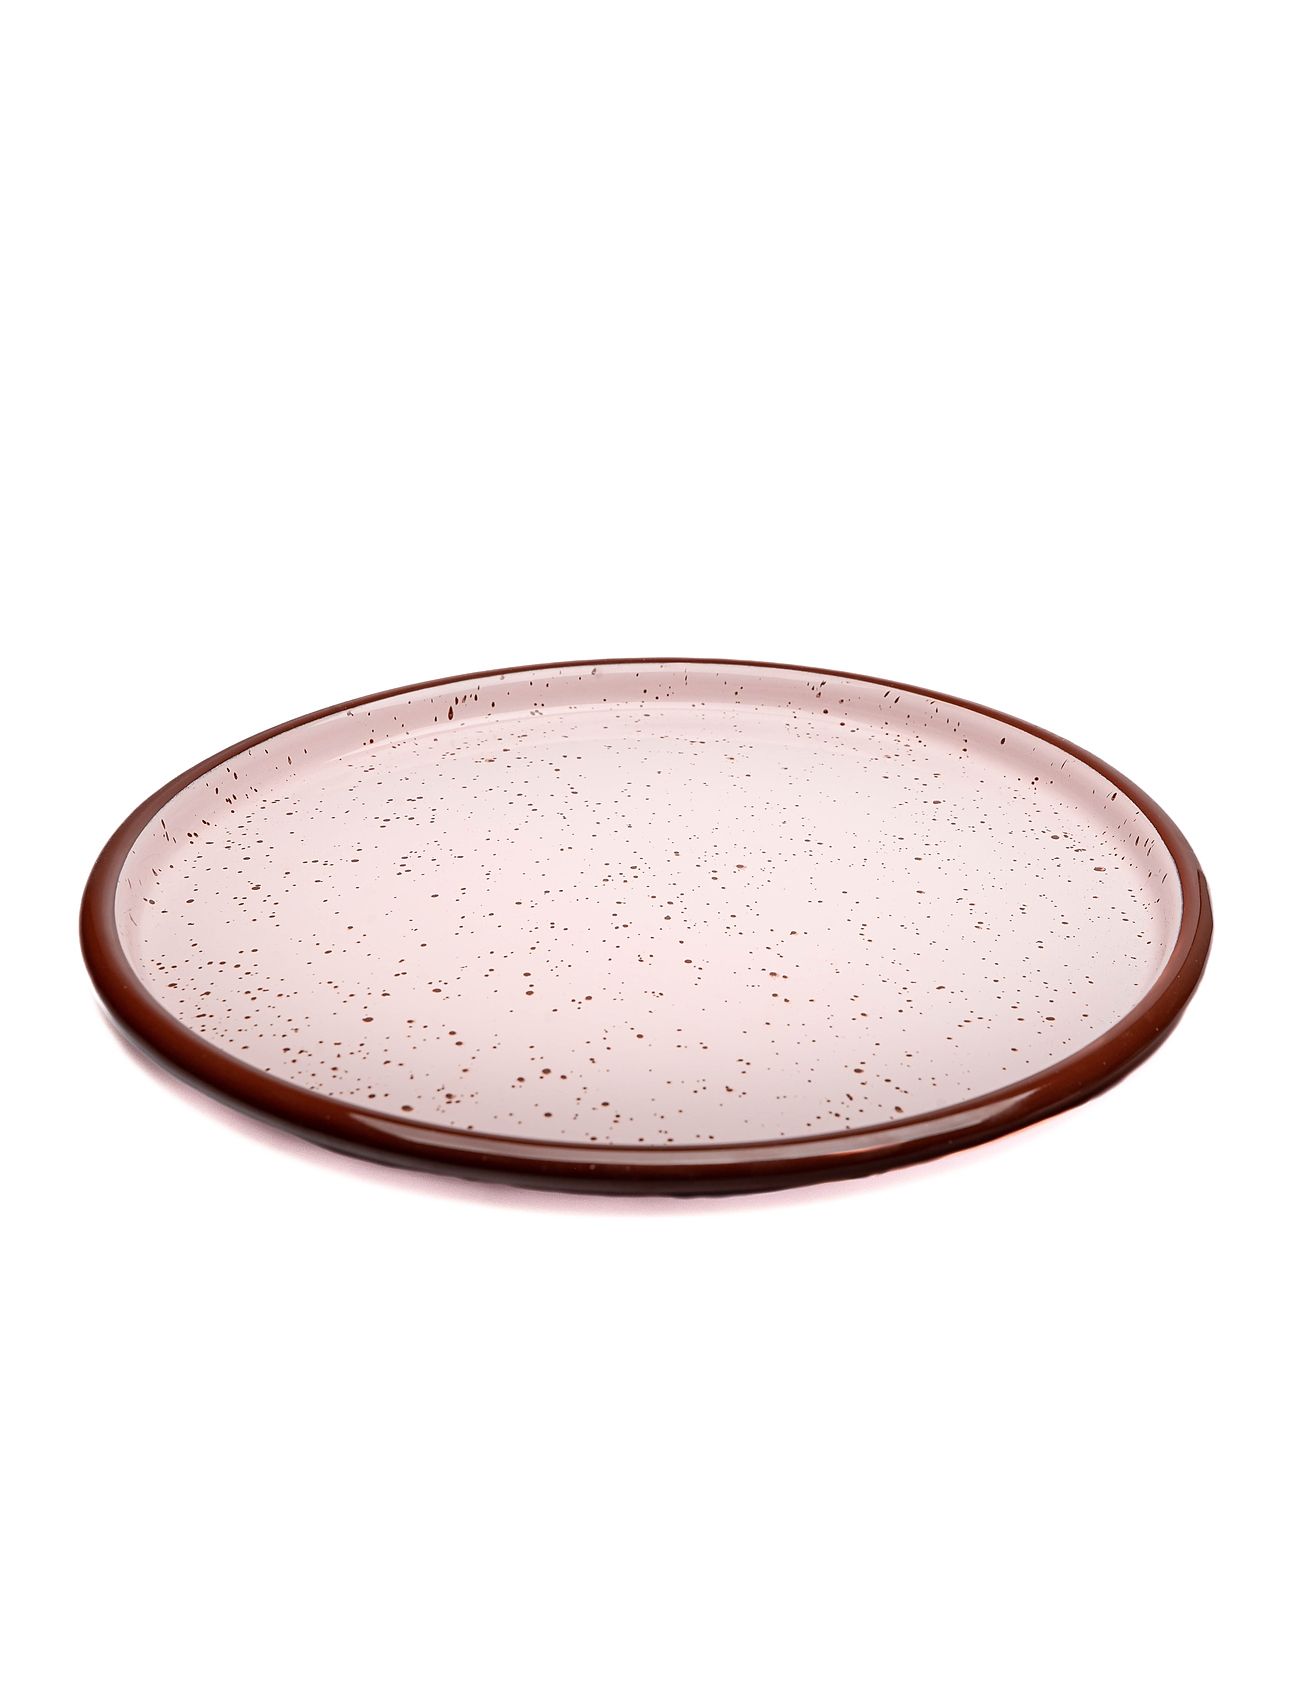 Sparkles Plate With Rosa & Brown Home Tableware Plates Dinner Plates Pink Anna Von Lipa